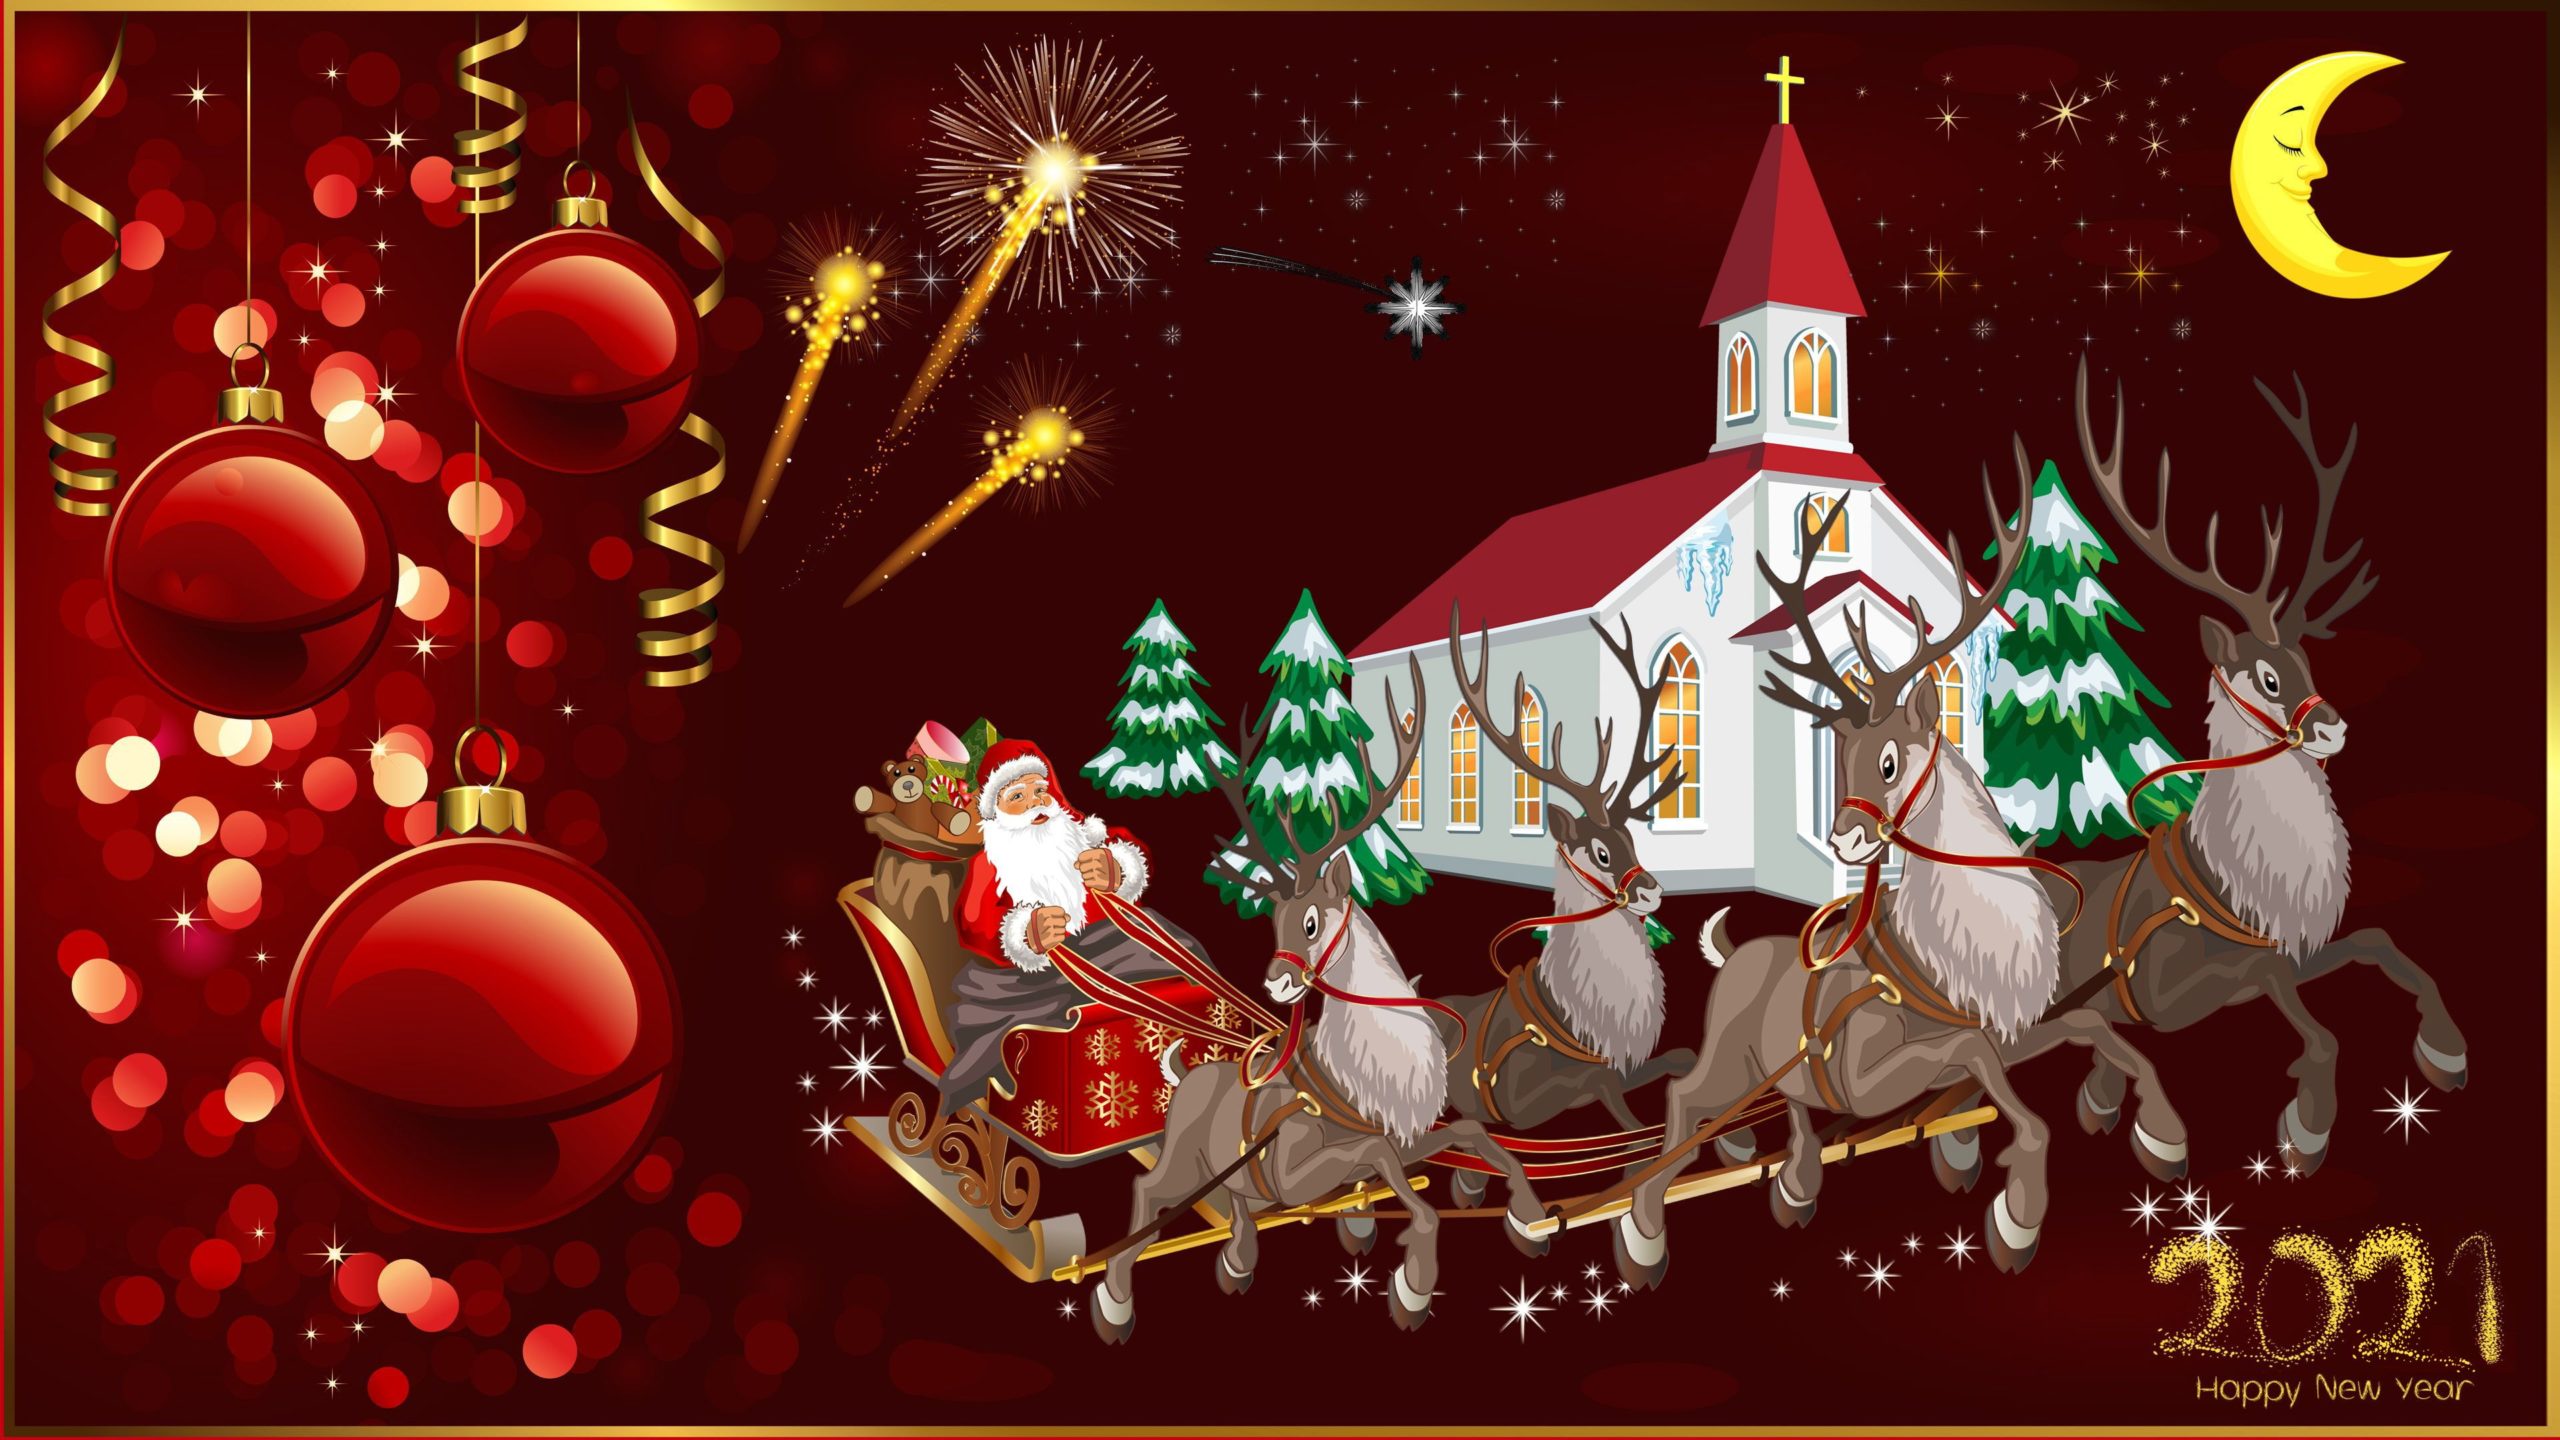 Merry Christmas 2021 Hd Wallpapers Quotes